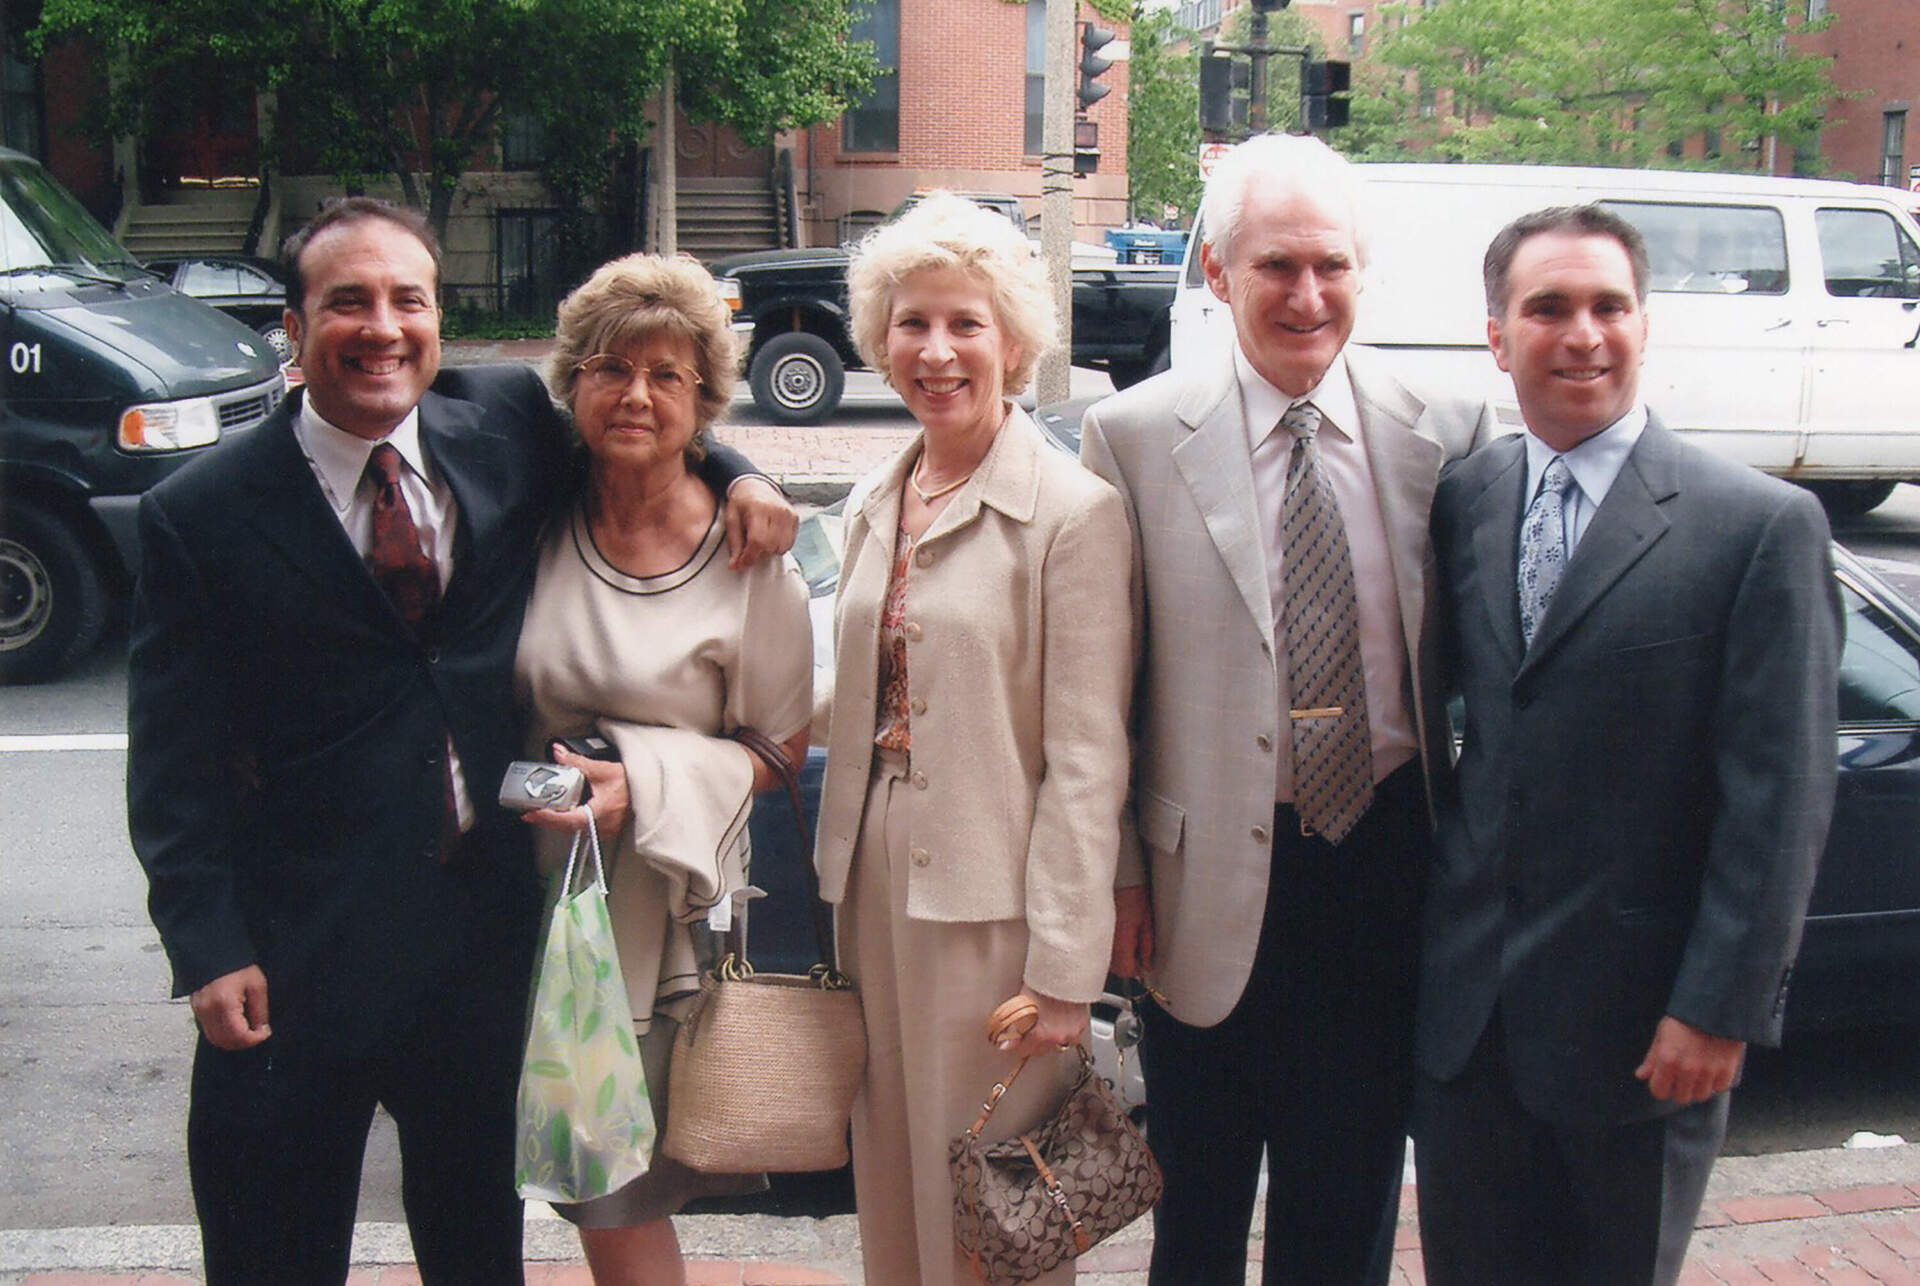 Russ Lopez (far left) and Andrew Sherman (far right) with their parents on their wedding day. (Courtesy of the couple)